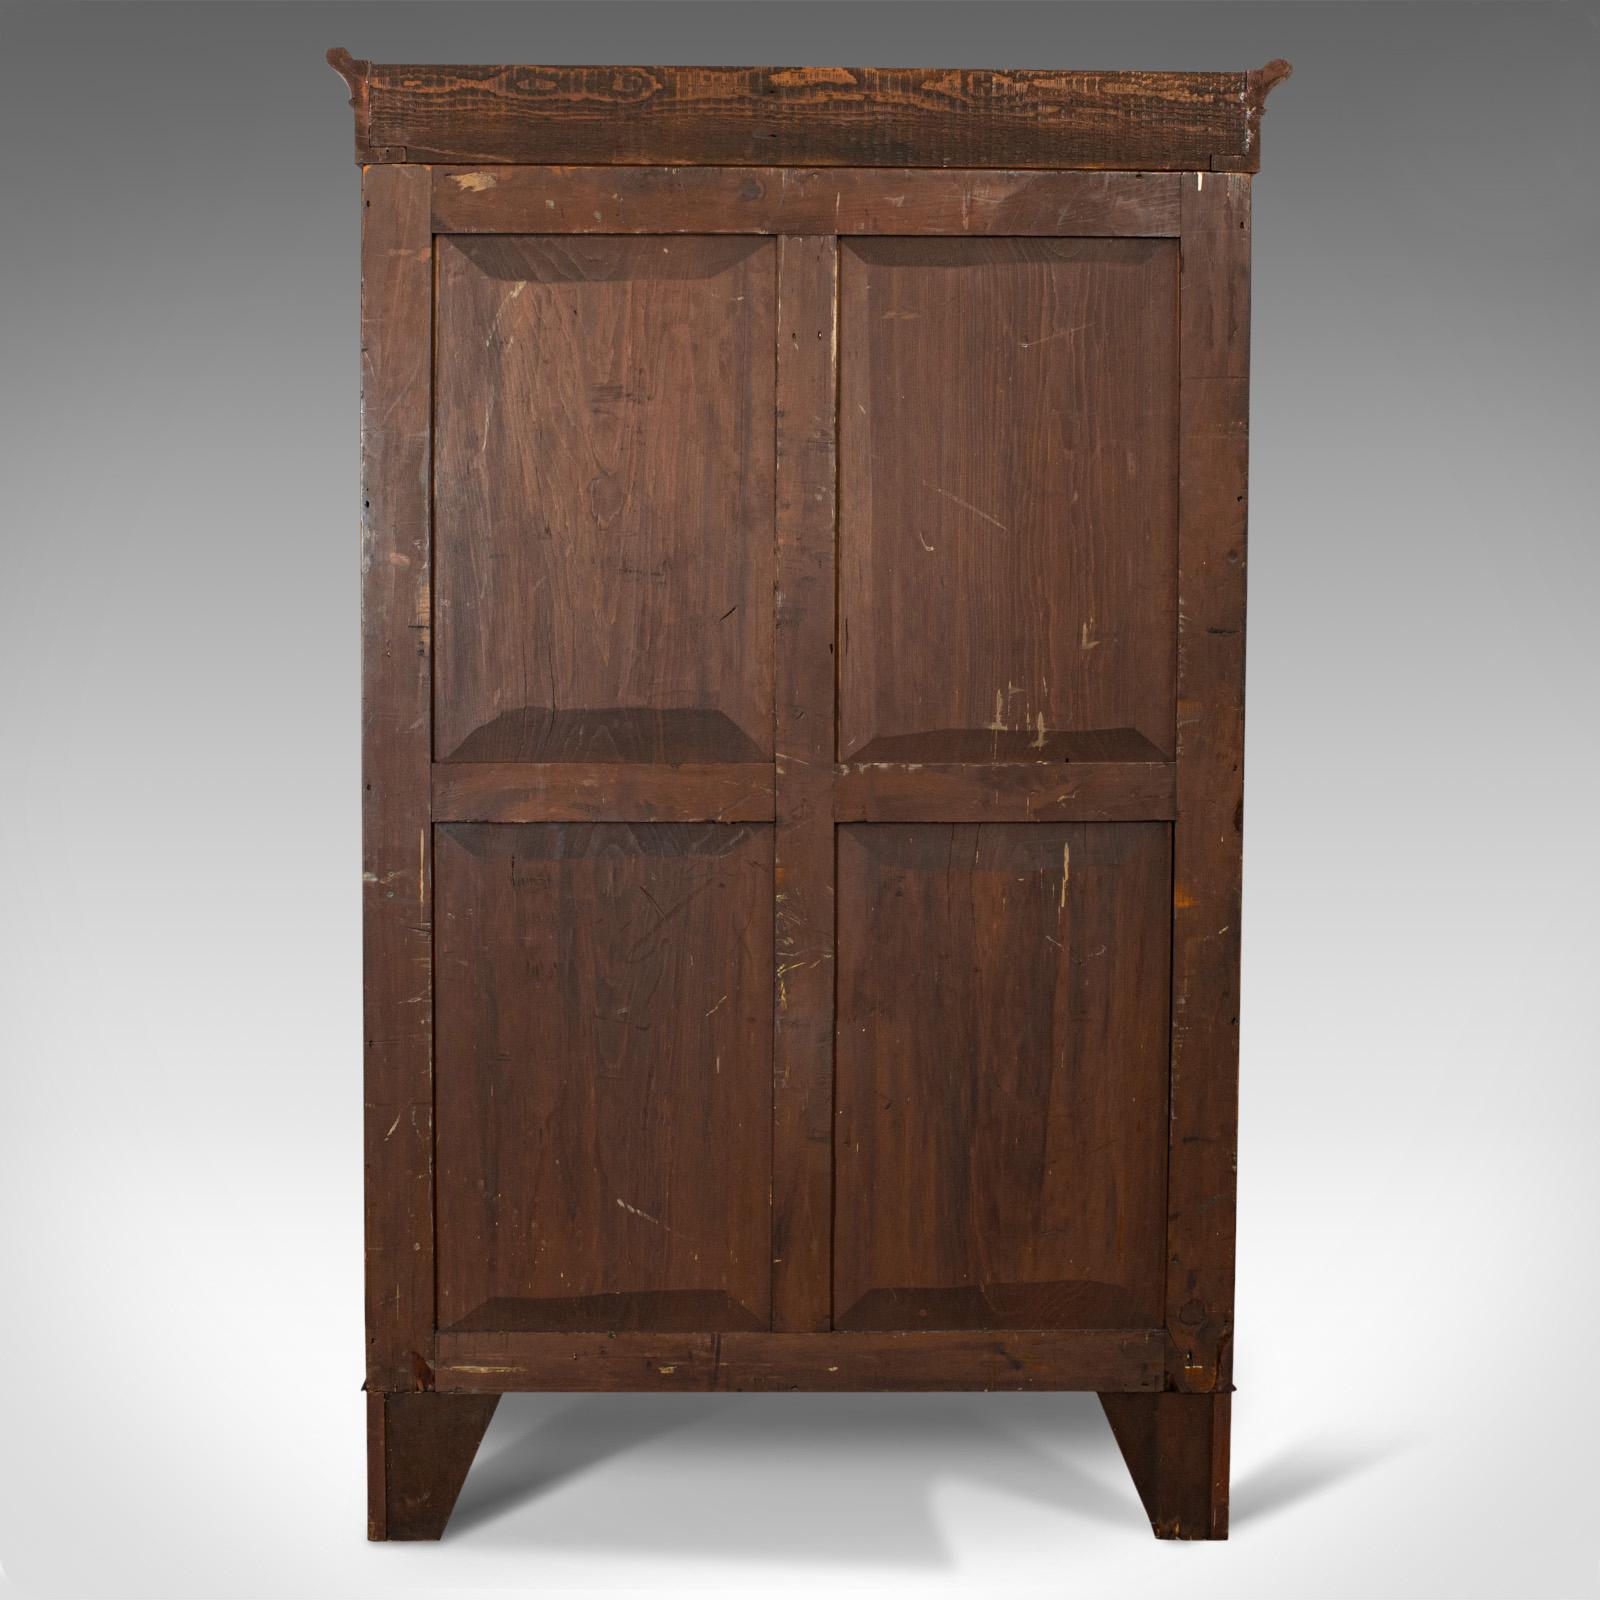 Early Victorian Antique Tallboy, English, Flame Mahogany, Tall Chest of Drawers, Victorian, 1850